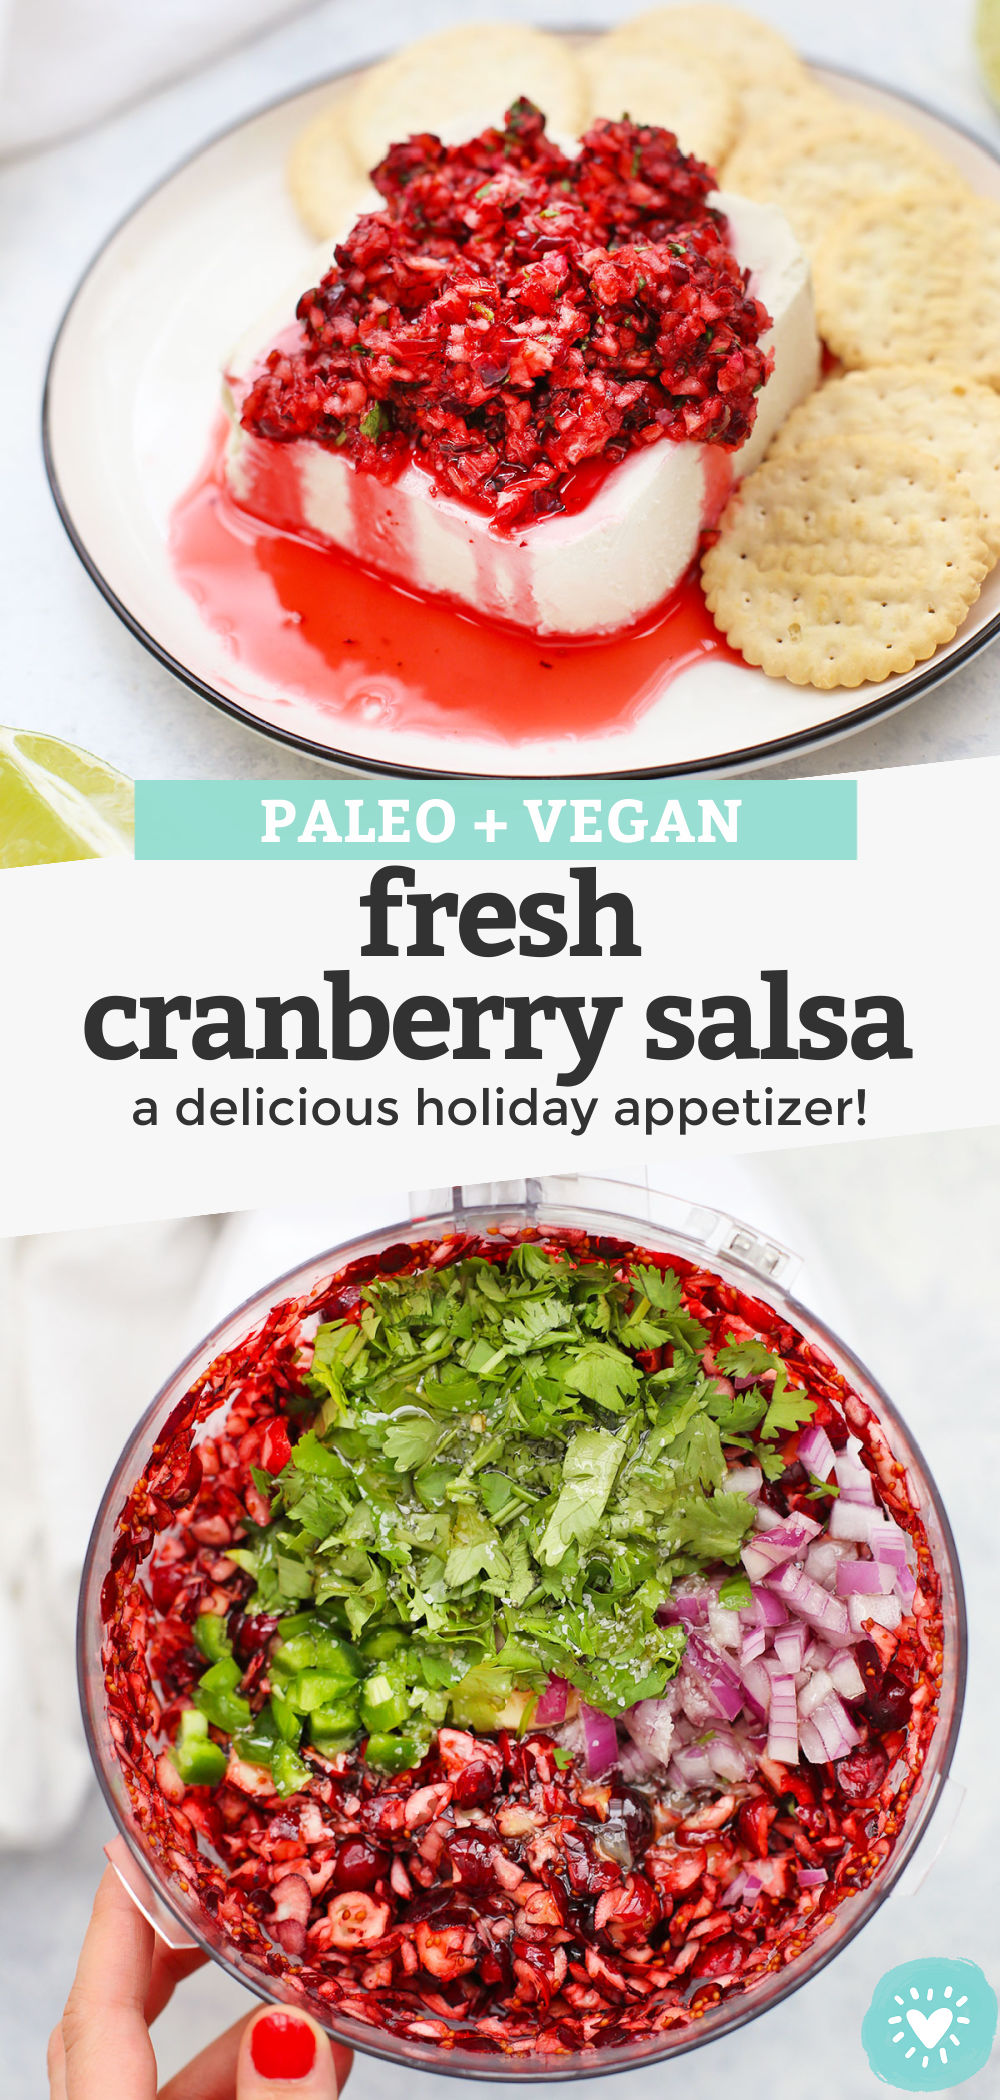 Fresh Cranberry Salsa (+a fun appetizer idea!) - Cranberry salsa is the perfect holiday appetizer! It's always a hit at parties. Check out all the fun ways to serve it in the post! (Paleo or Vegan) Cranberry Salsa Cream Cheese Dip // cranberry salsa recipe #cranberry #salsa #appetizer #holidayappetizer #paleothanksgiving #veganthanksgiving